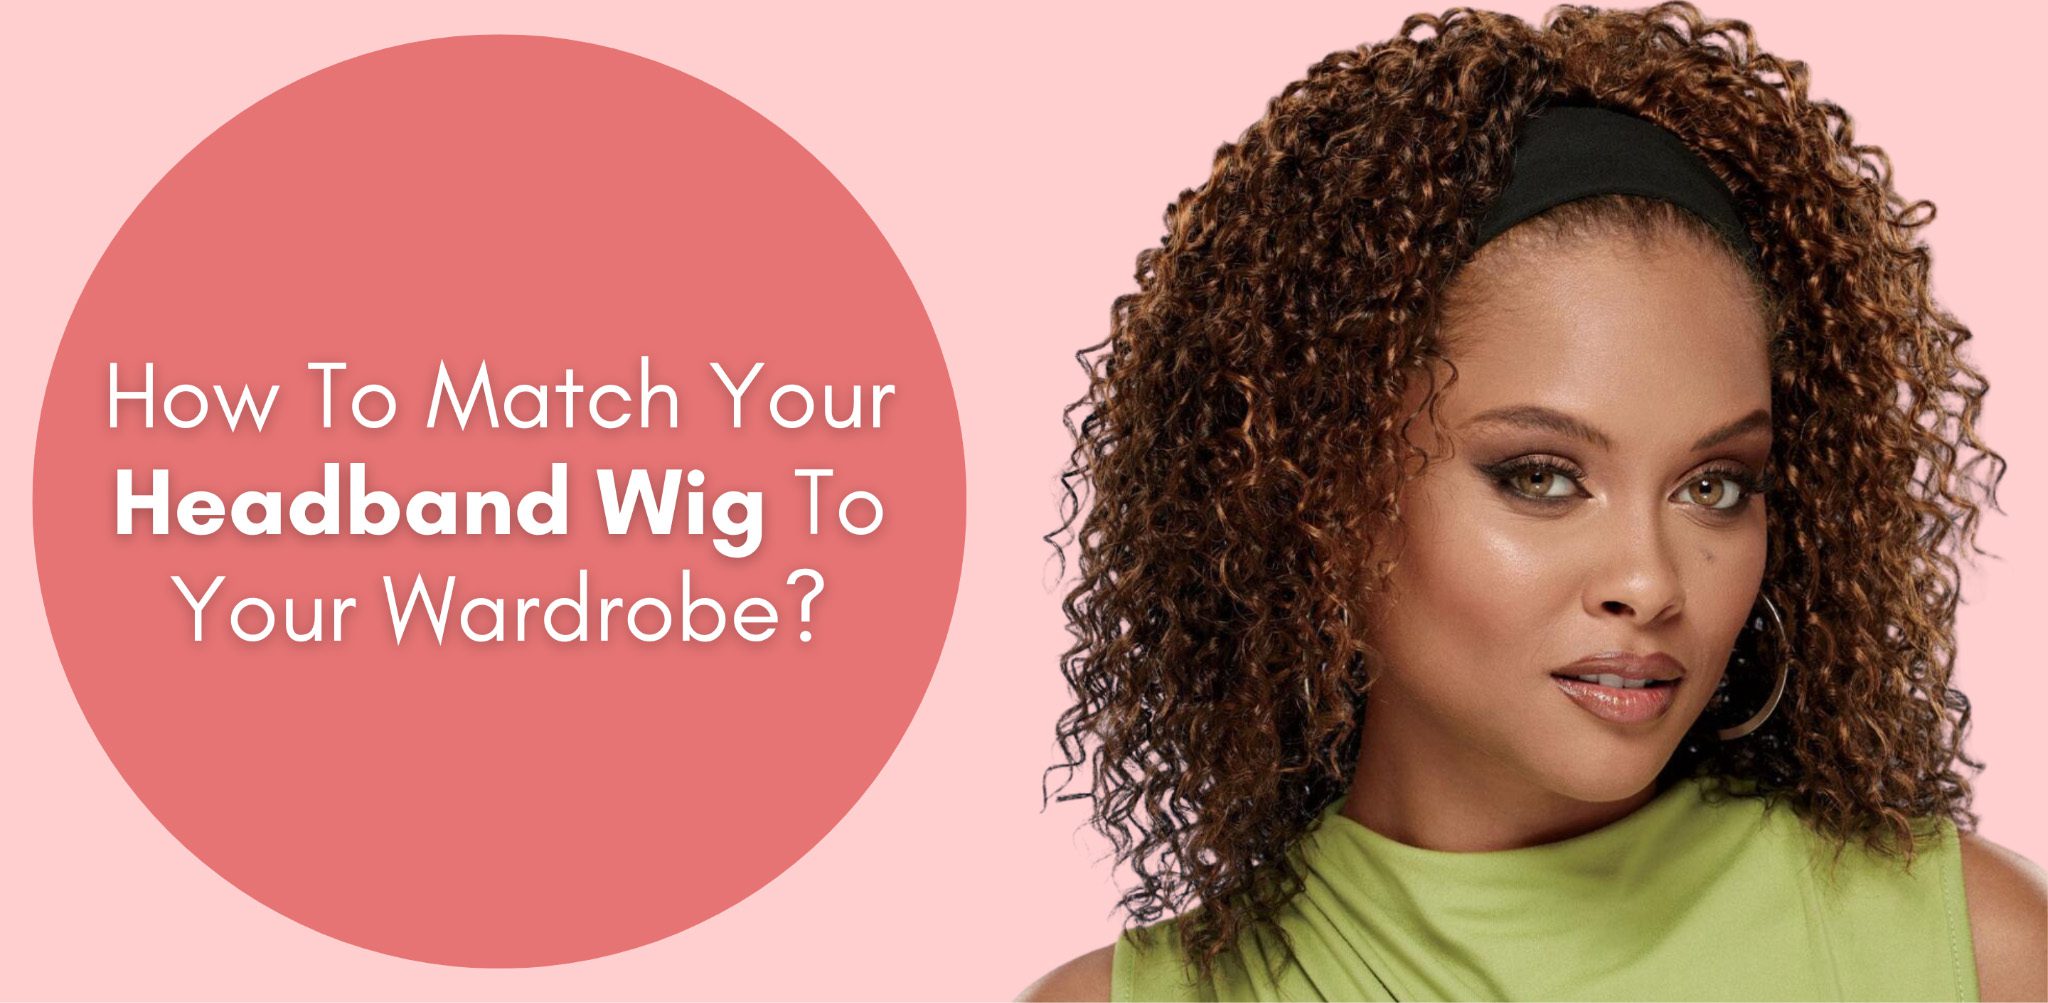 How To Match Your Headband Wig To Your Wardrobe?